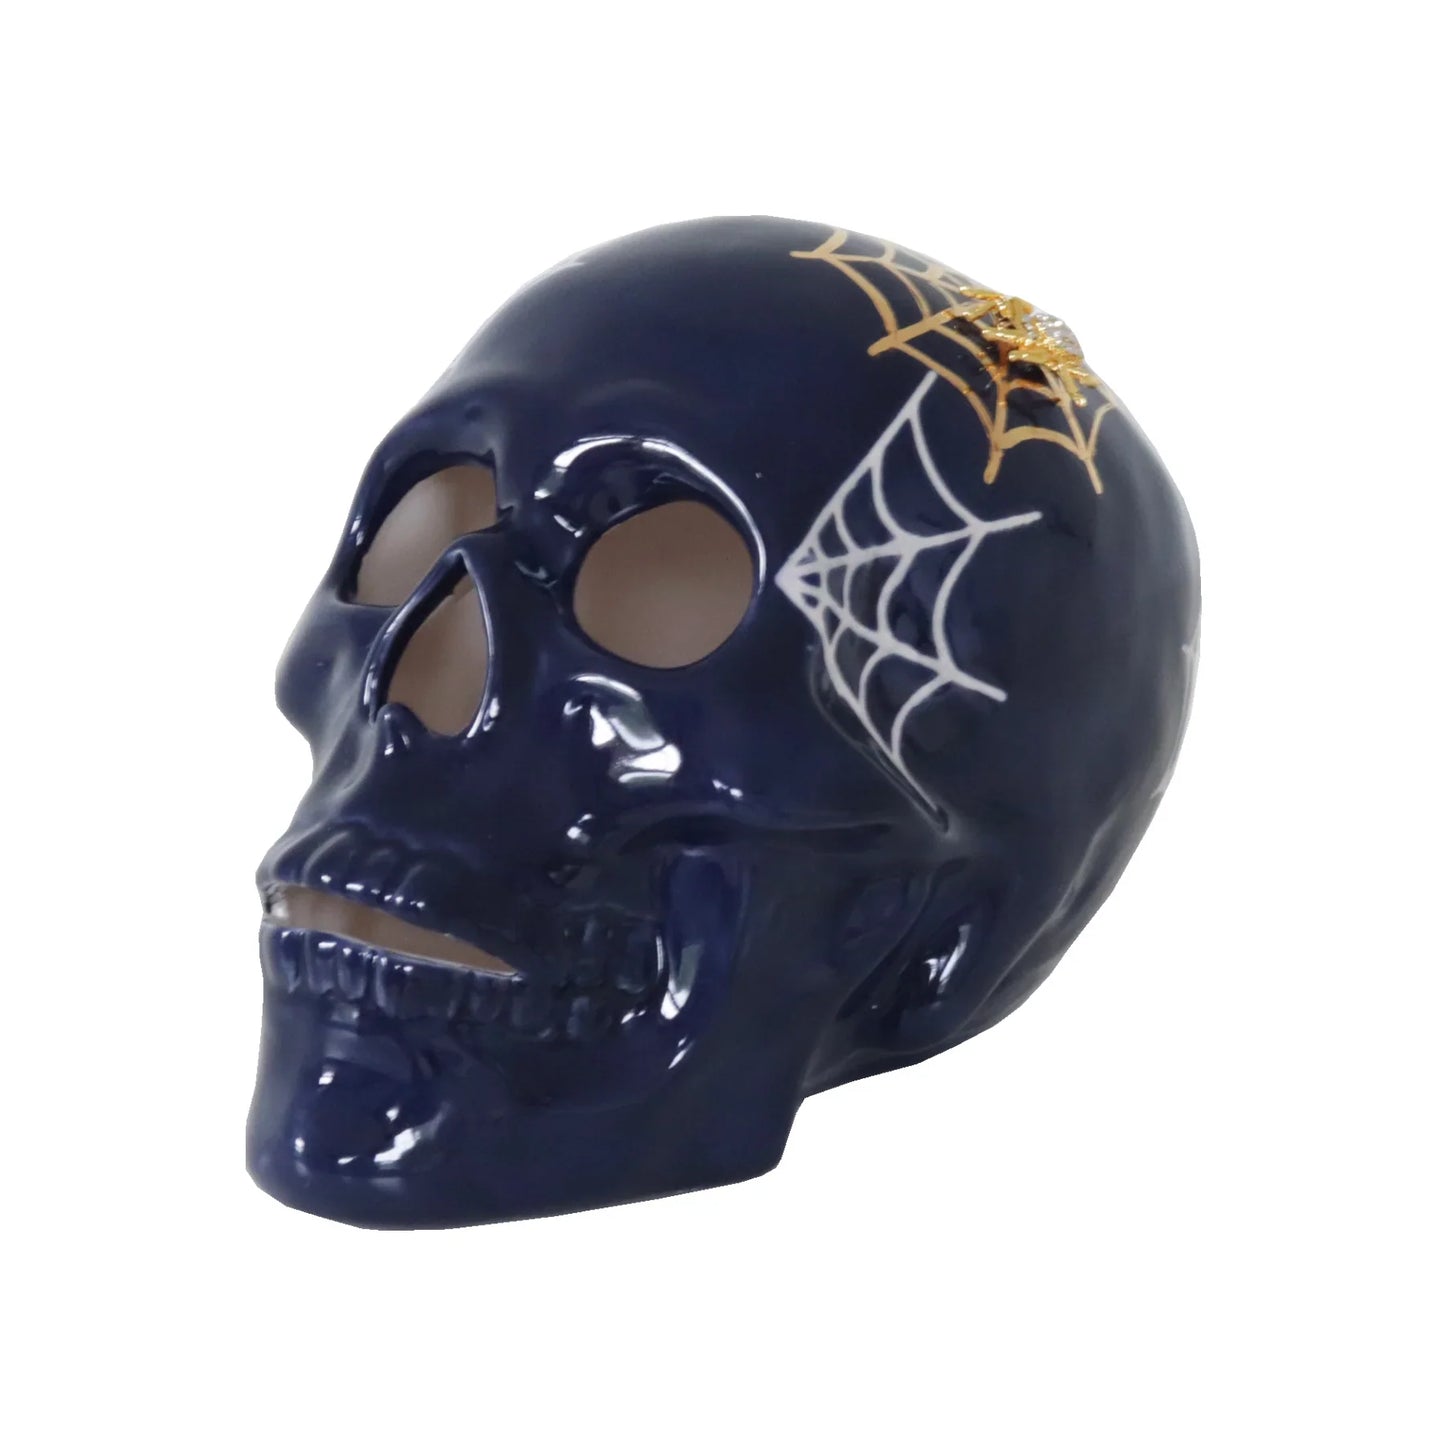 "Mr. Bones and Charlotte" Skull Decor with 22K Gold Accents- Navy Blue | Wholesale